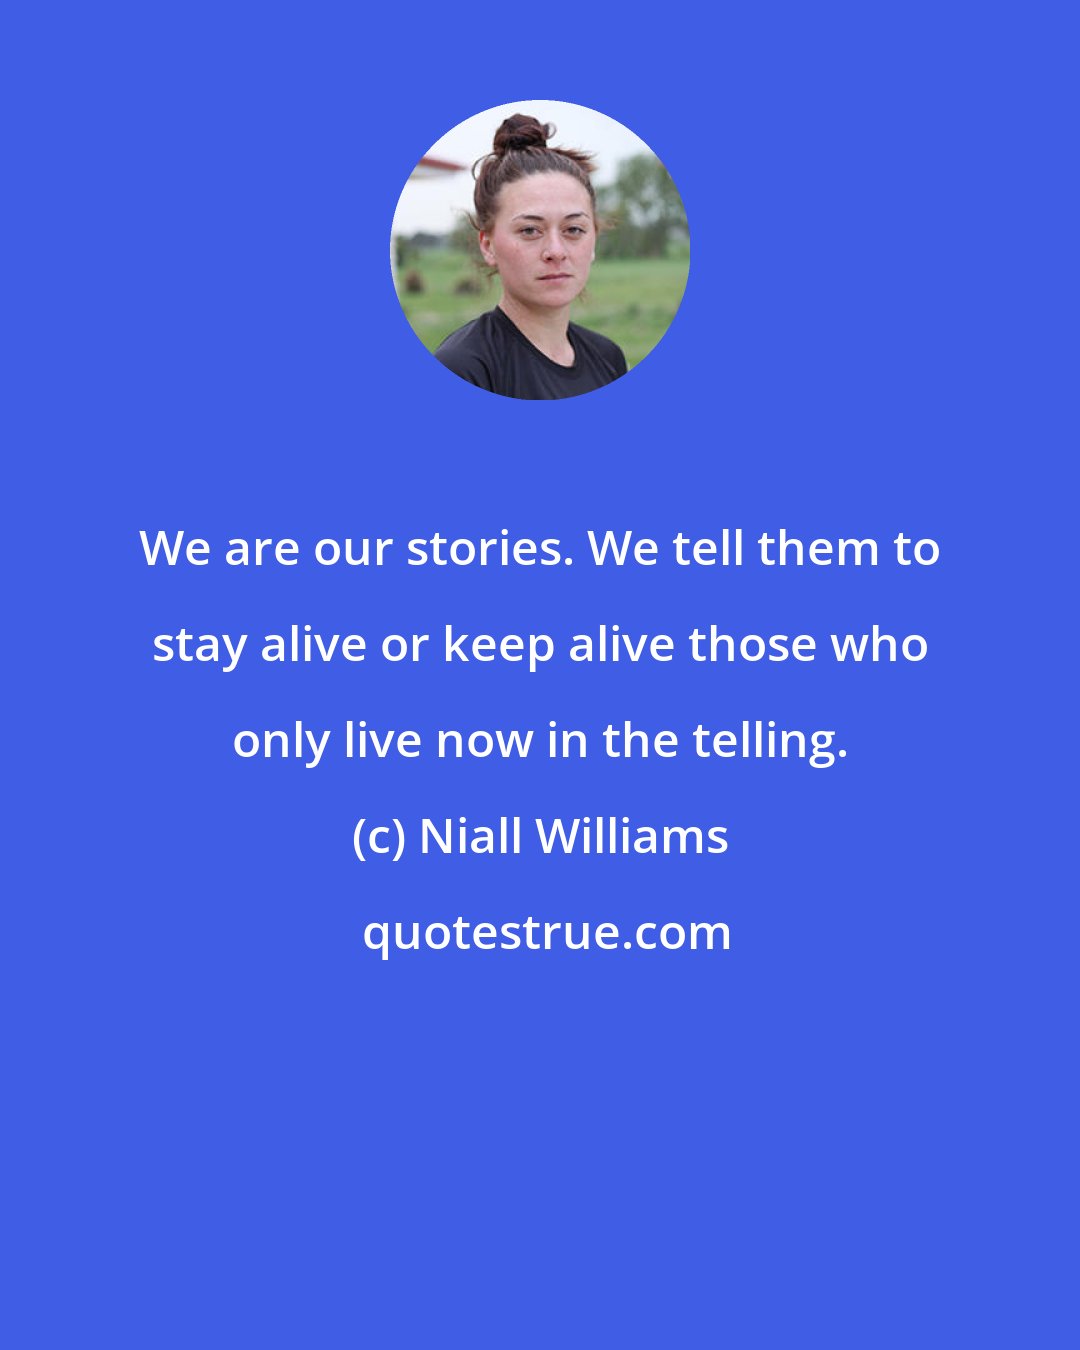 Niall Williams: We are our stories. We tell them to stay alive or keep alive those who only live now in the telling.